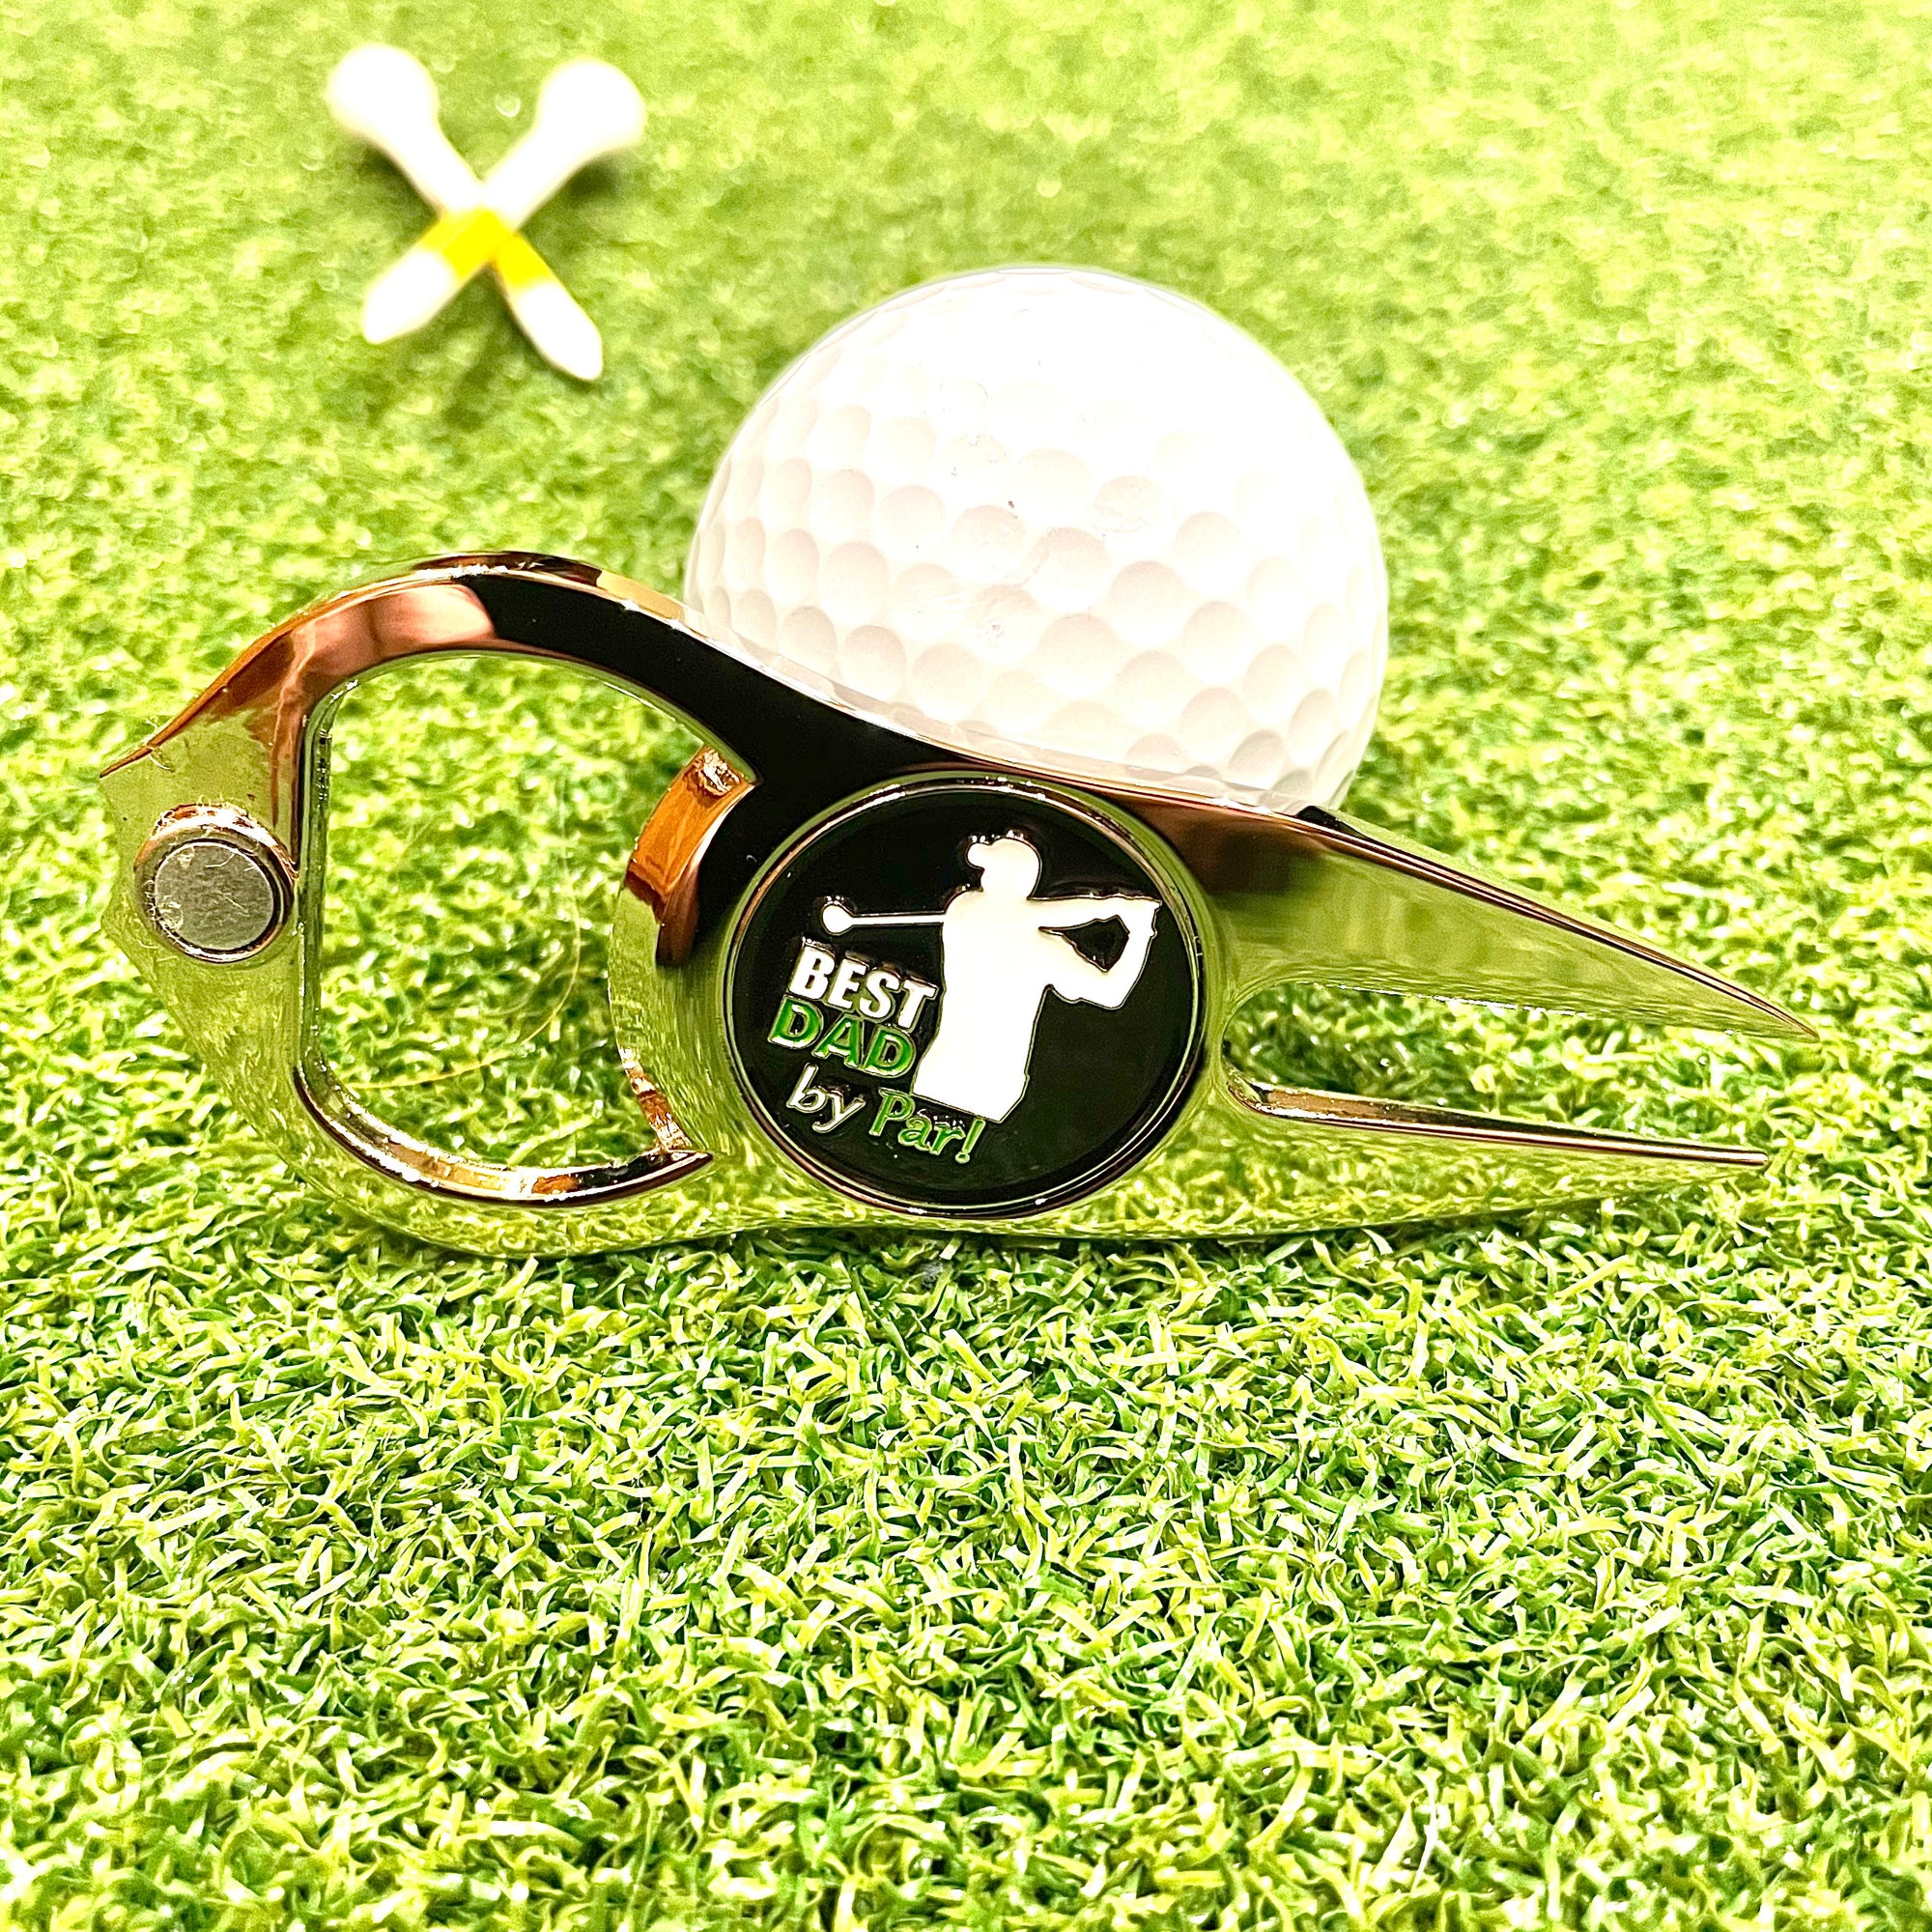 Pishavi Best PaPa by Par Funny Golf Divot Repair Tool, Dad Golf Ball  Marker, Golf Accessories for Men, Golf Gifts for Dad Grandpa Husband,  Retirement Gifts for Golf Lover Coworkers - Yahoo